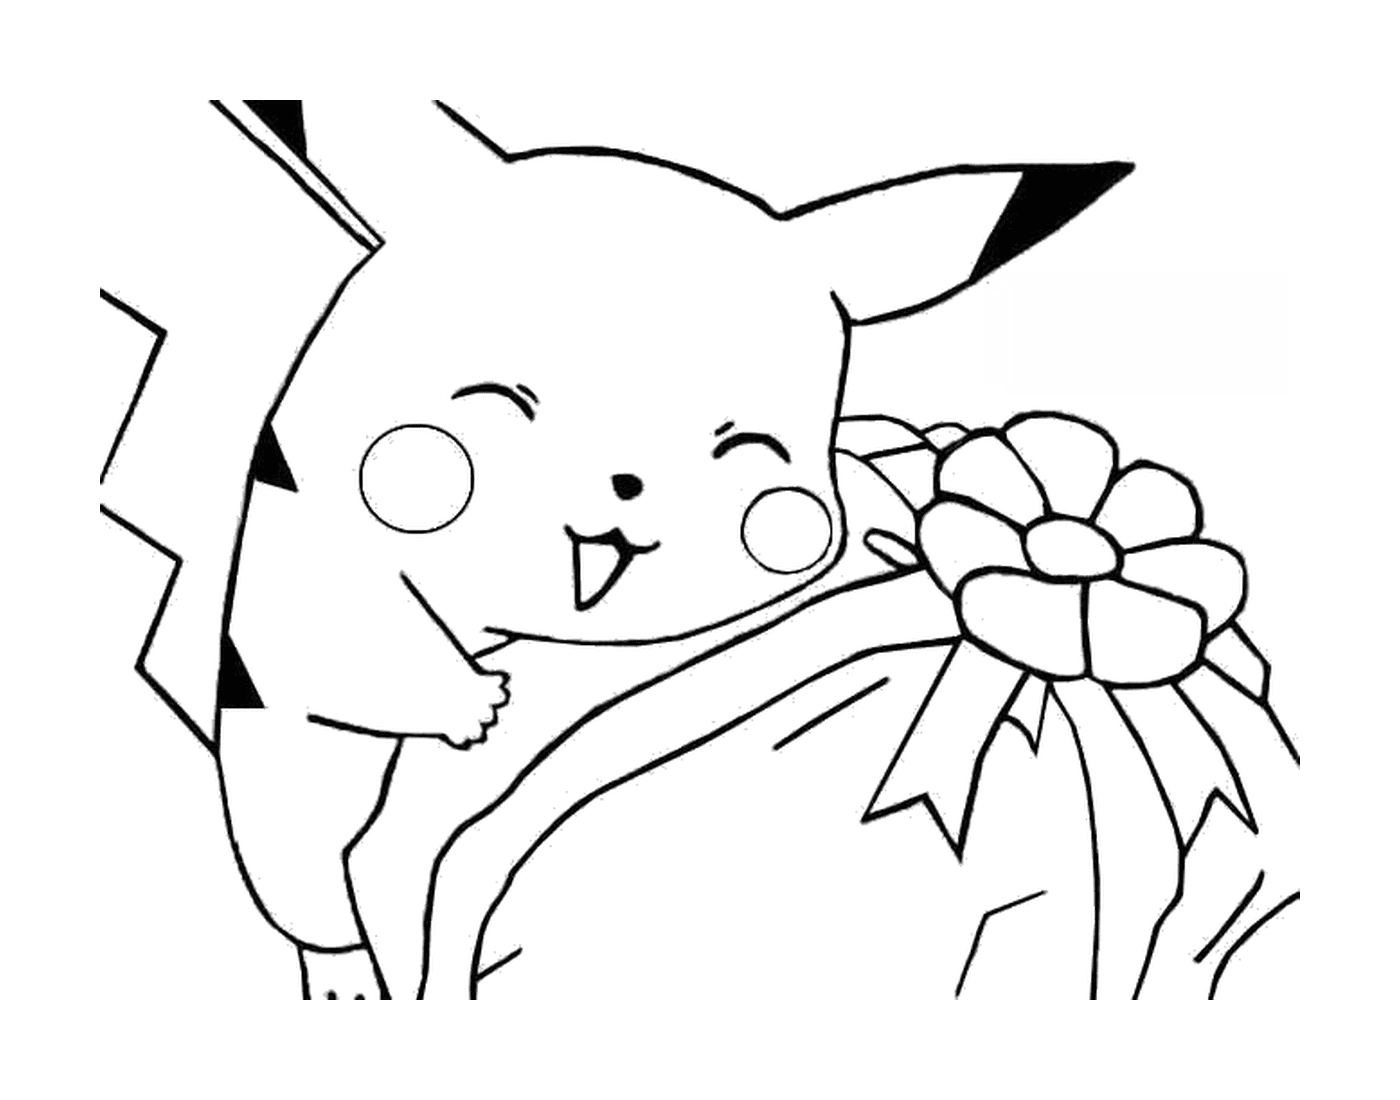  Pikachu offers a gift 